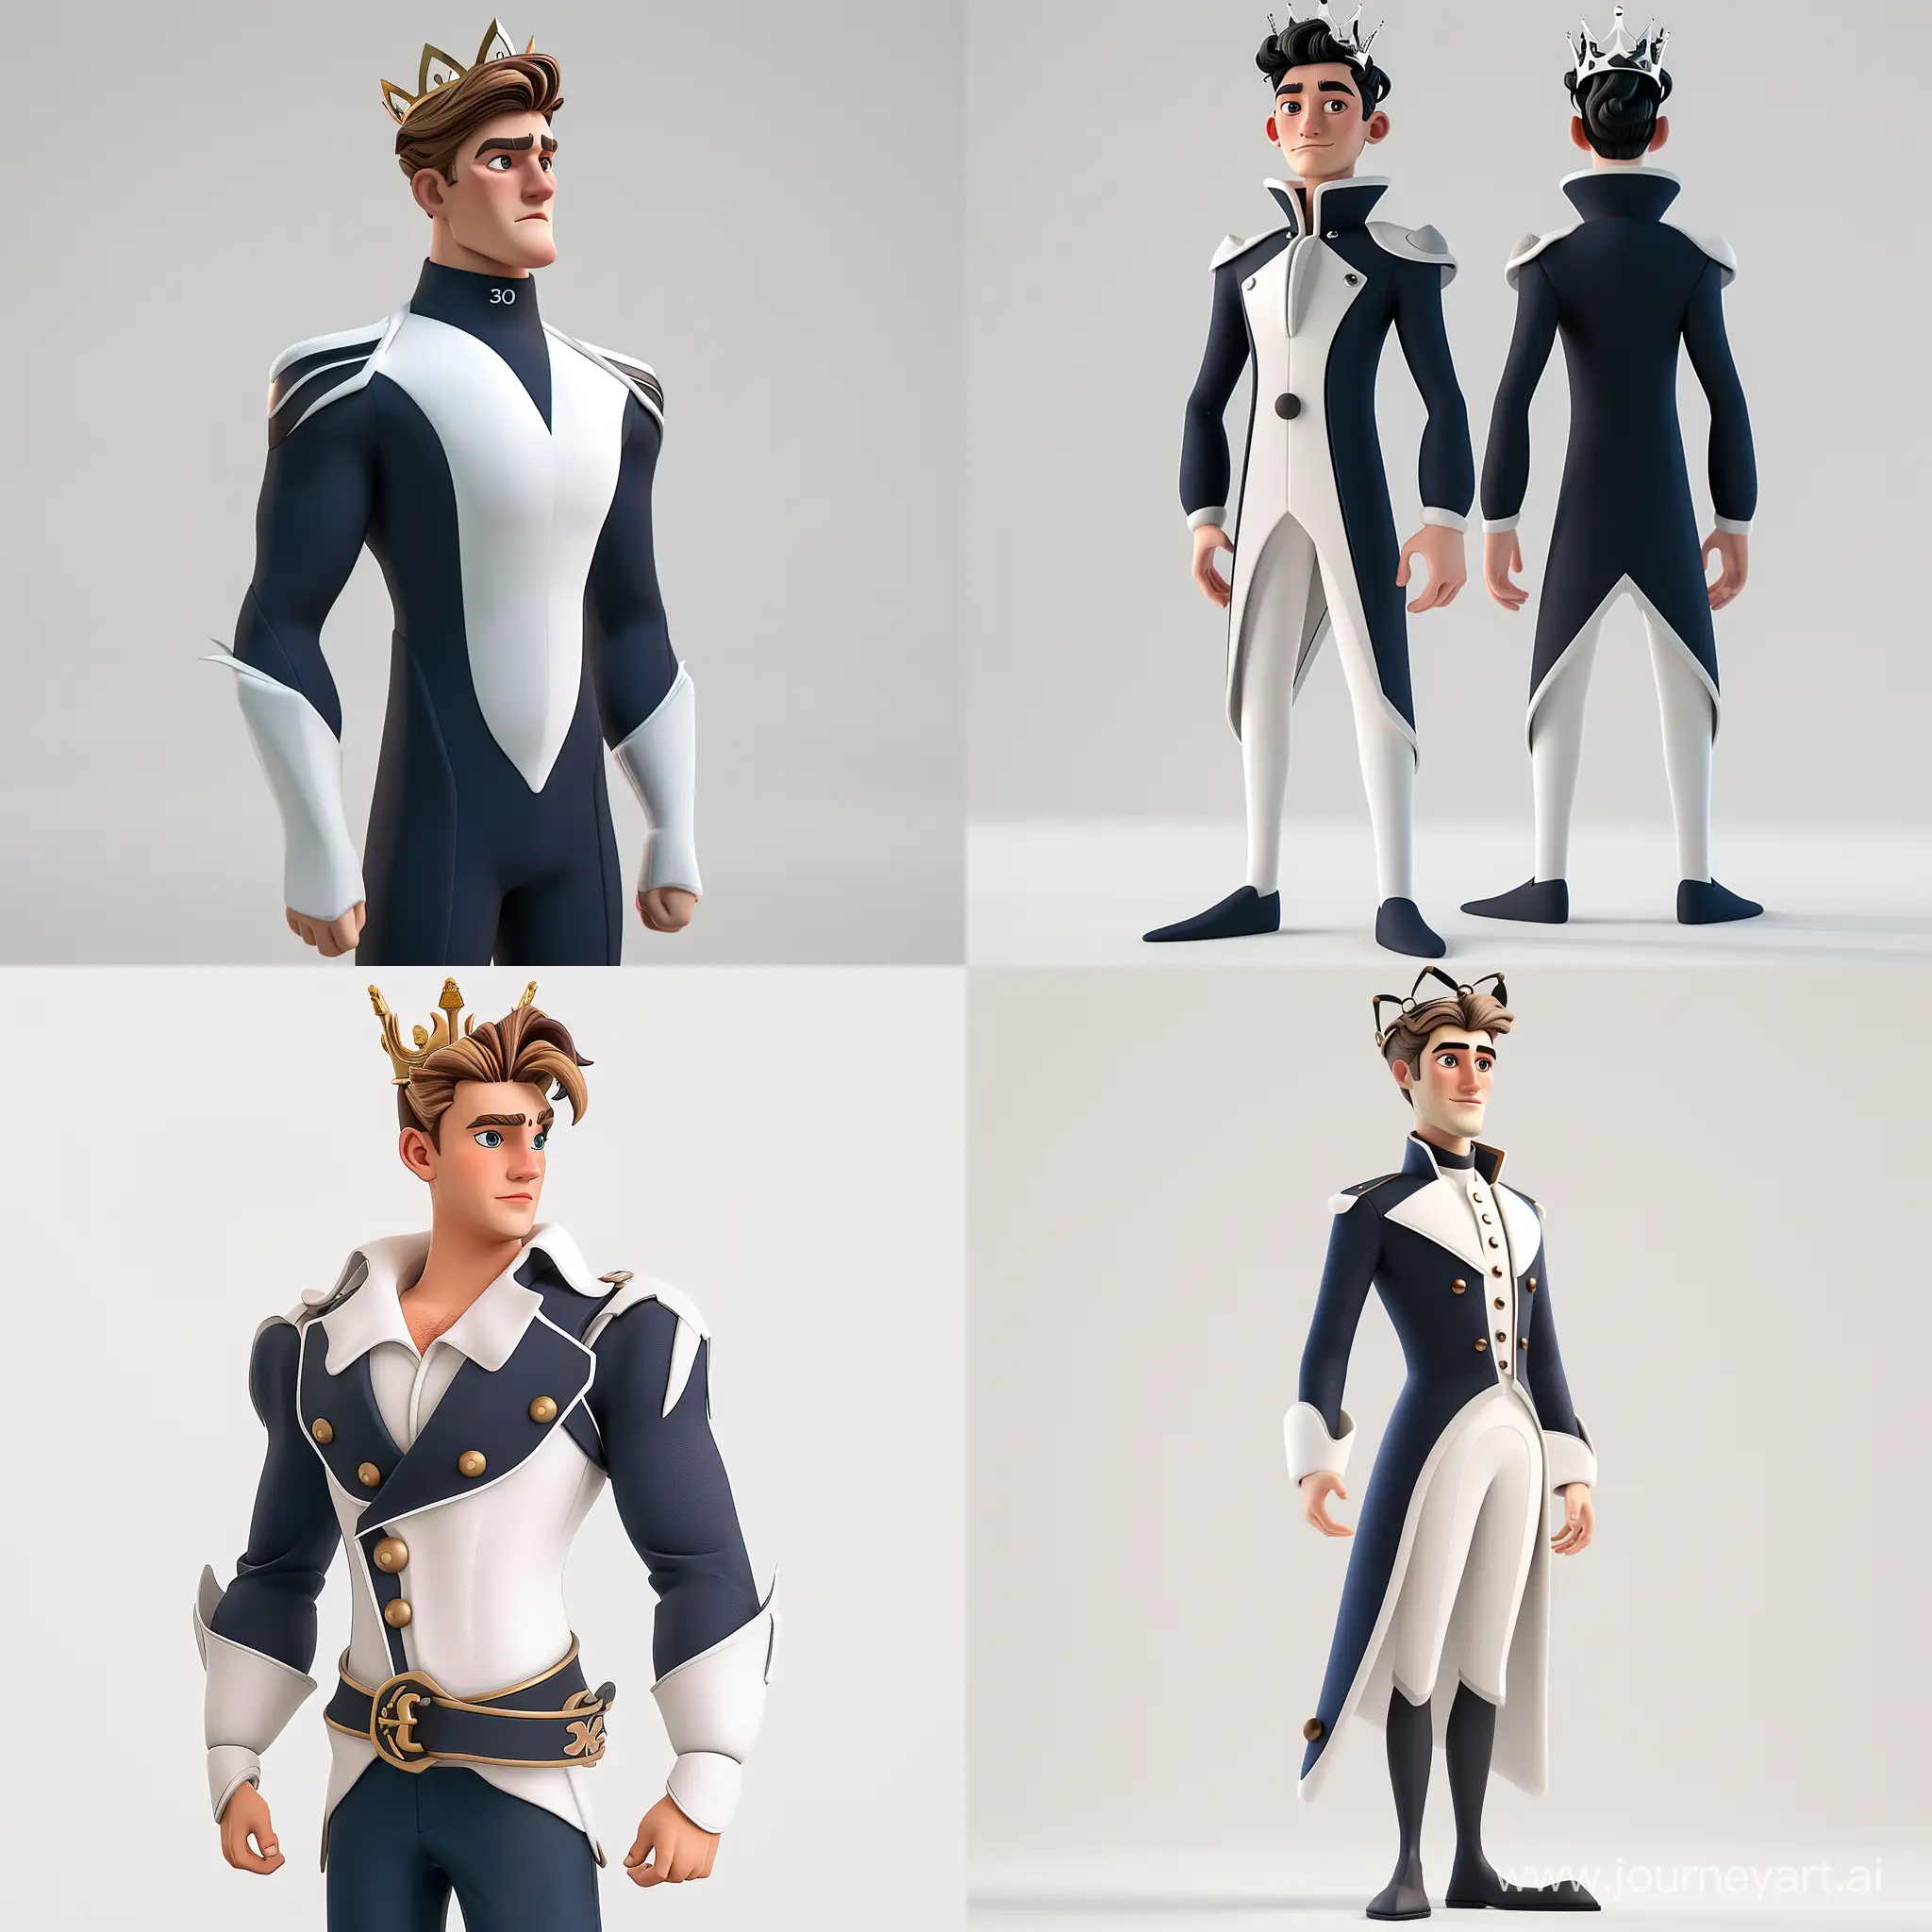 3d Cartoonic Character Design, Pixar Style: A Man Wearing Modern Clothes: Navy Blue & White Clothes Details, Crown on Head, Looking to the Left, Cinematic Pose, Full Body Shot,White Background, Vectorize, Blender Software, High Precision-- style raw